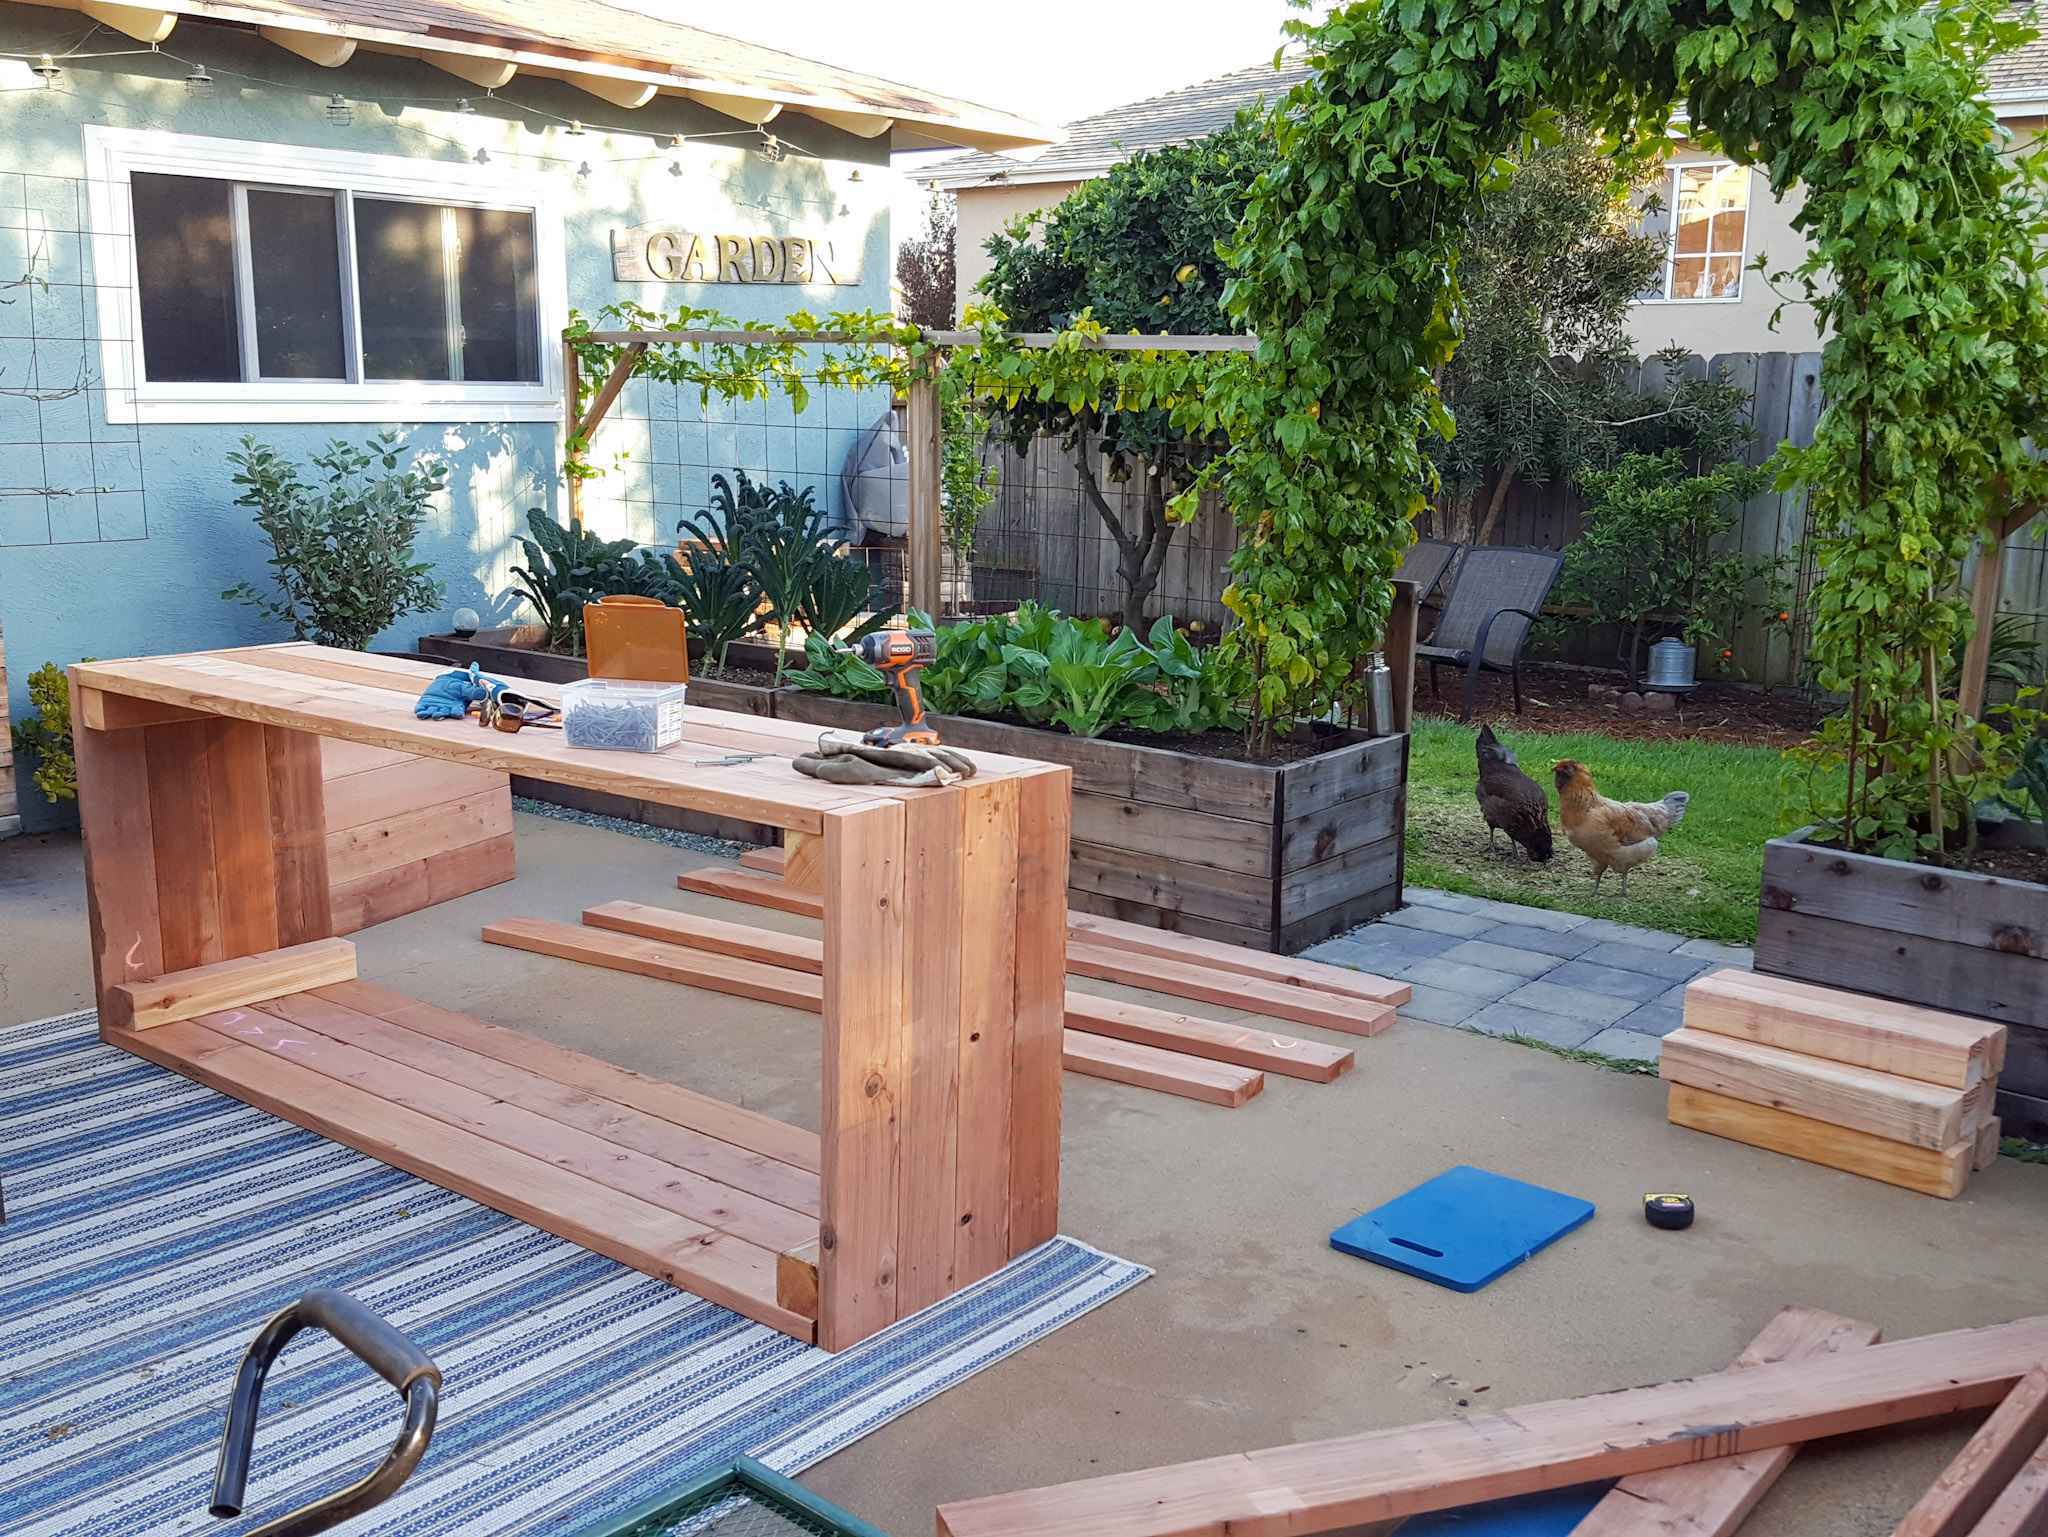 The back patio contains a newly constructed raised garden bed on its side with various pieces and lengths of wood scattered about that are to be used for another bed. There is a drill, gloves, and a box of screws sitting atop the completed raised bed while two chickens look inside into the patio through the arch pathway. 